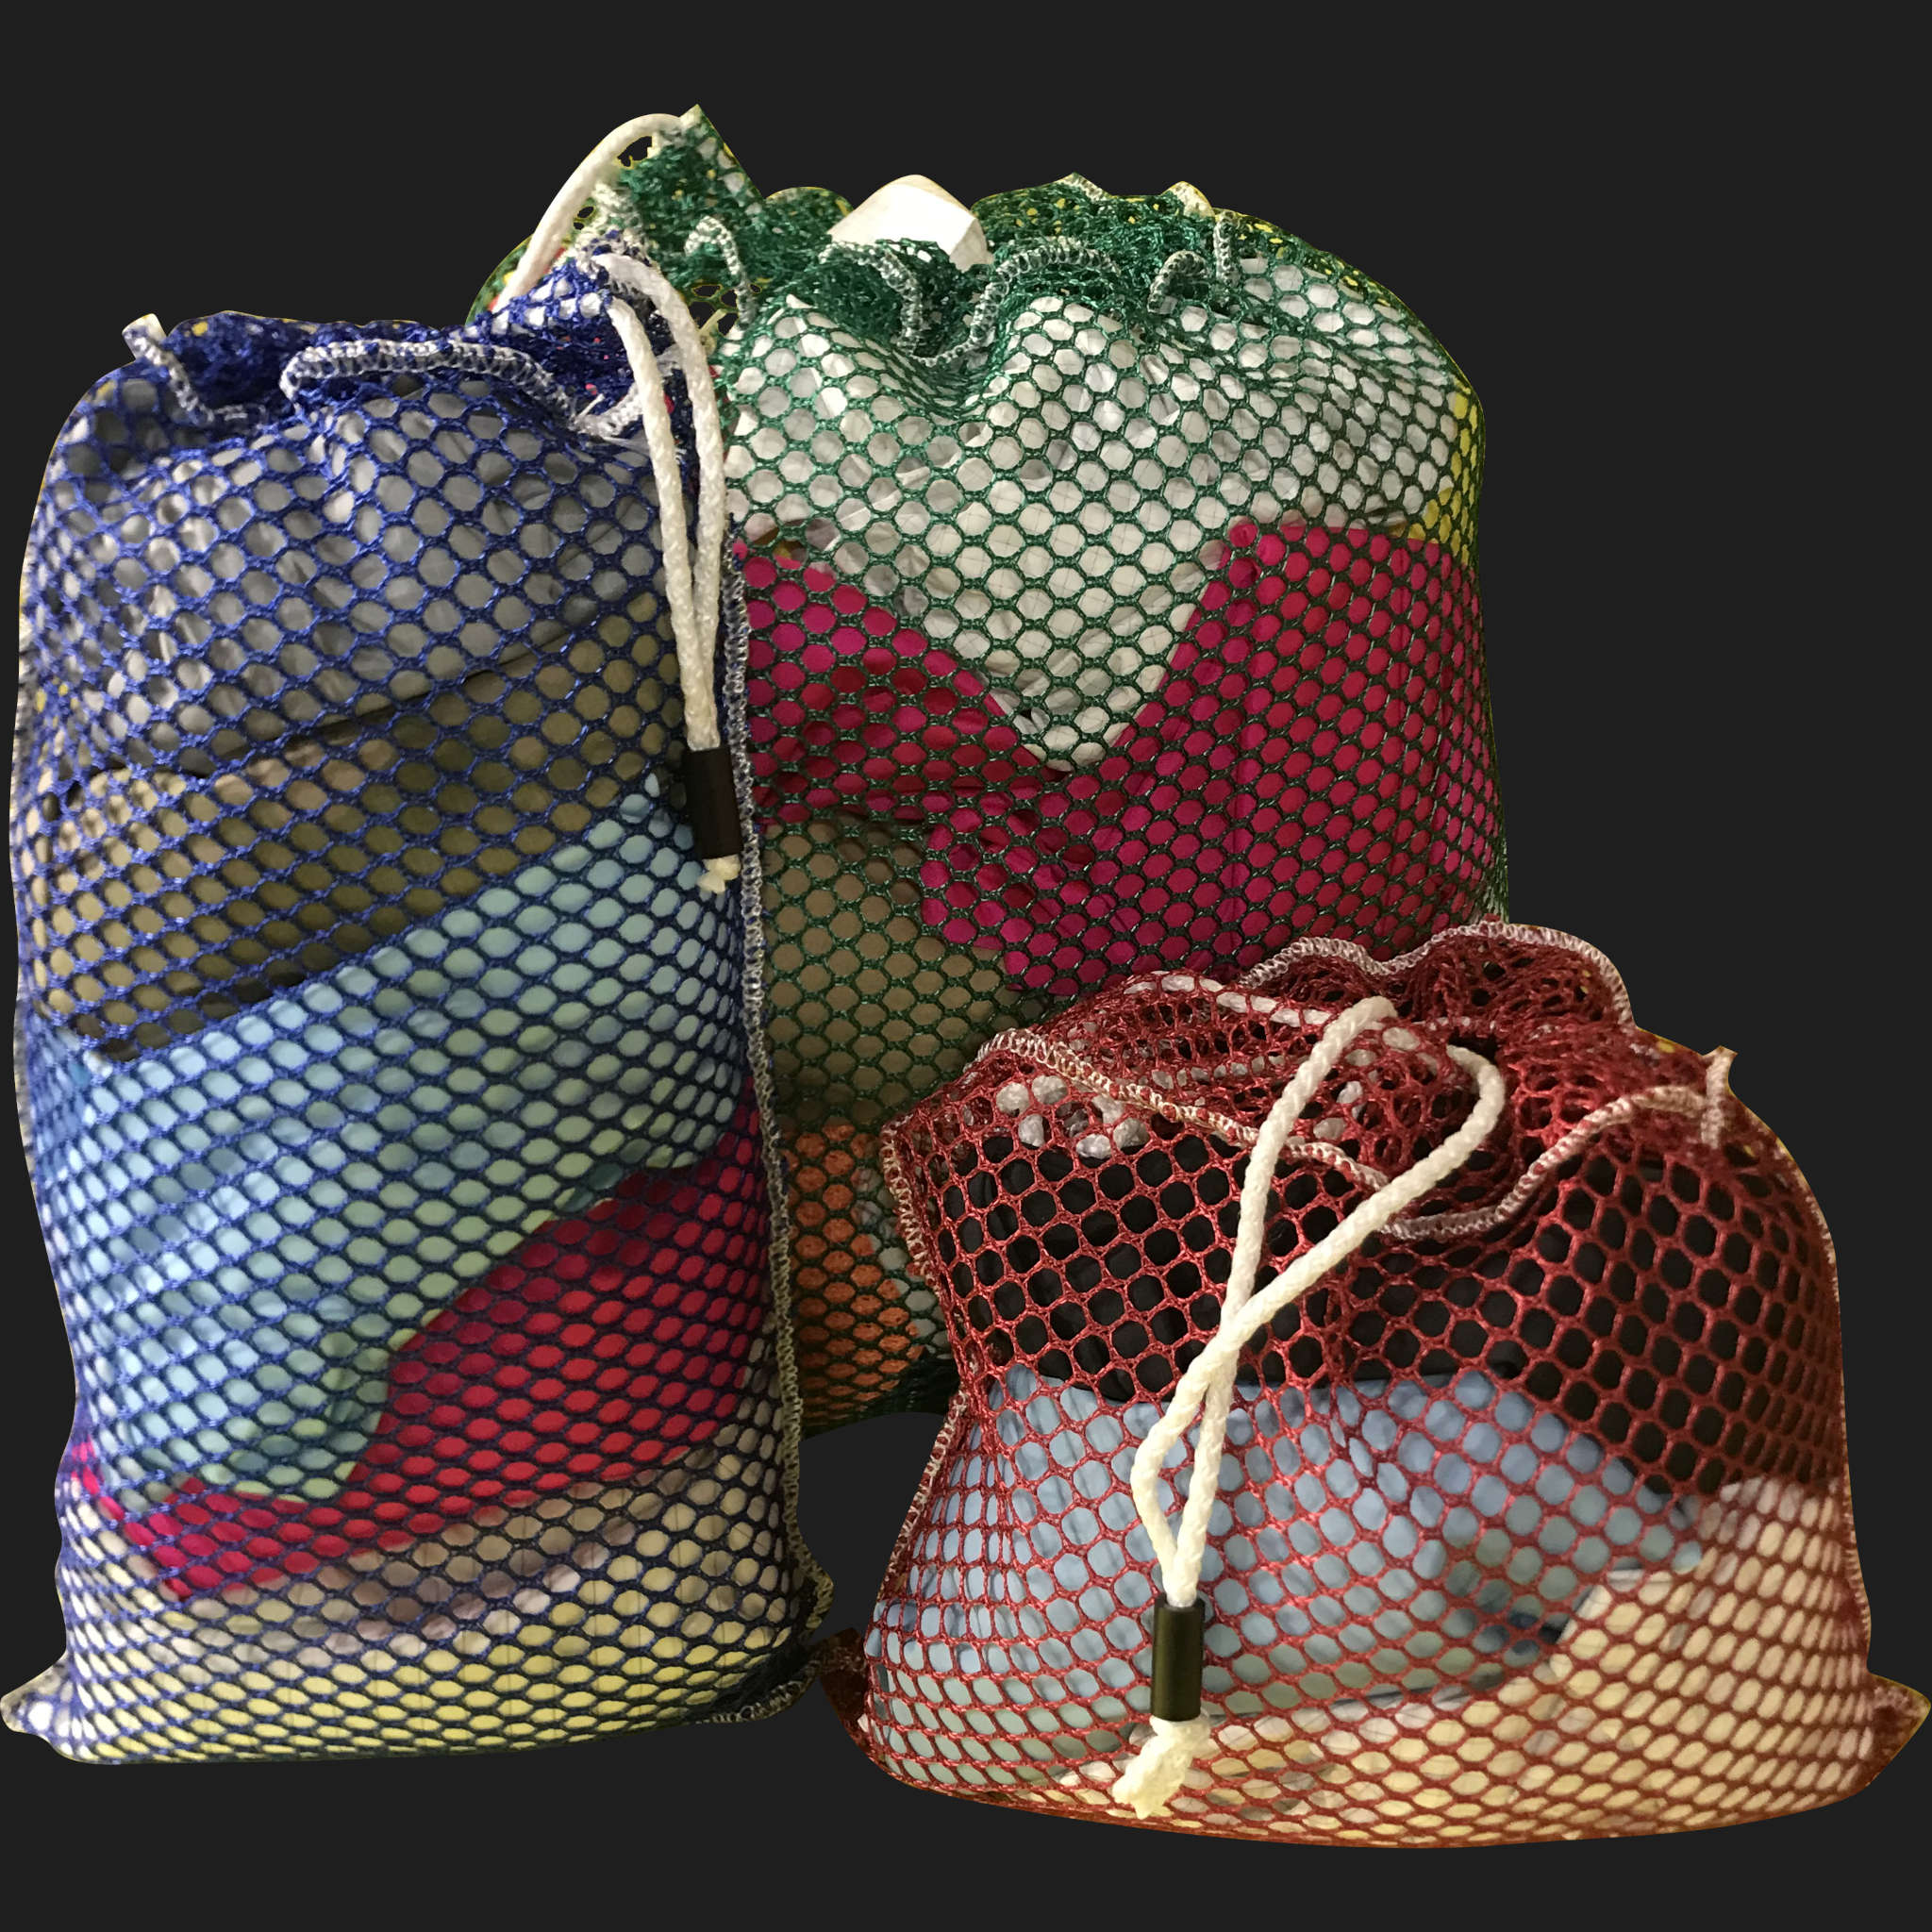 46" x 70" Customized Mesh-Net-Laundry Bags Heavy Duty with Cord and barrellock closure